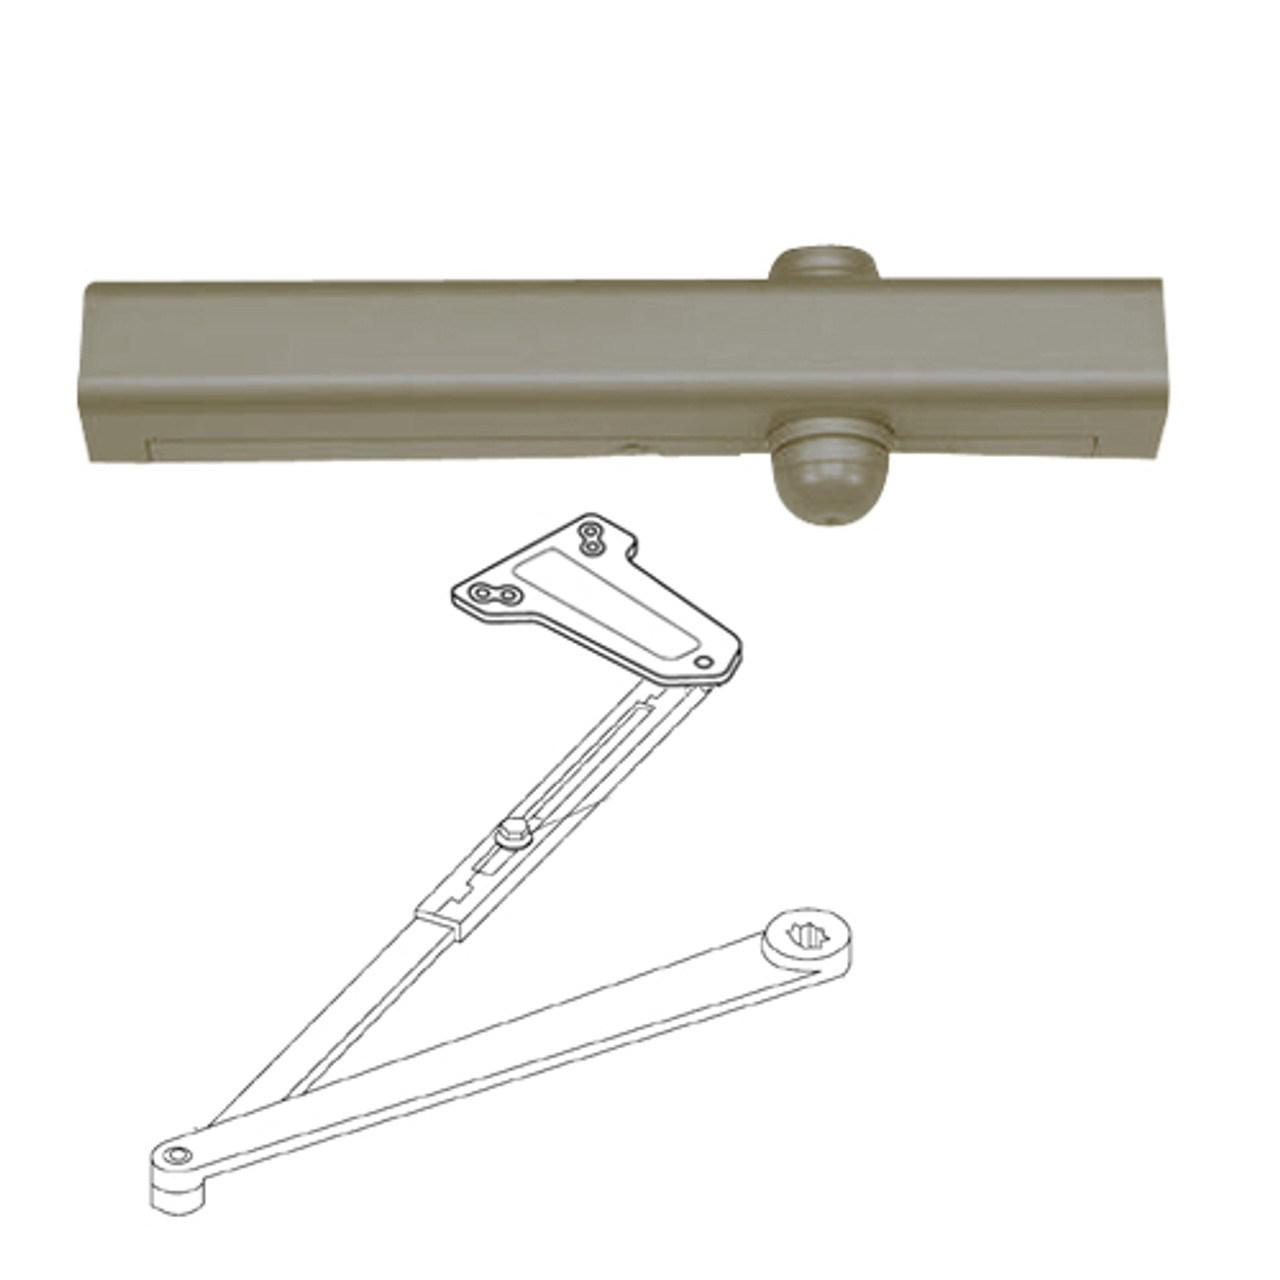 PA3381-694 Yale 3000 Series Architectural Door Closer with Parallel Low Profile Arm in Medium Bronze